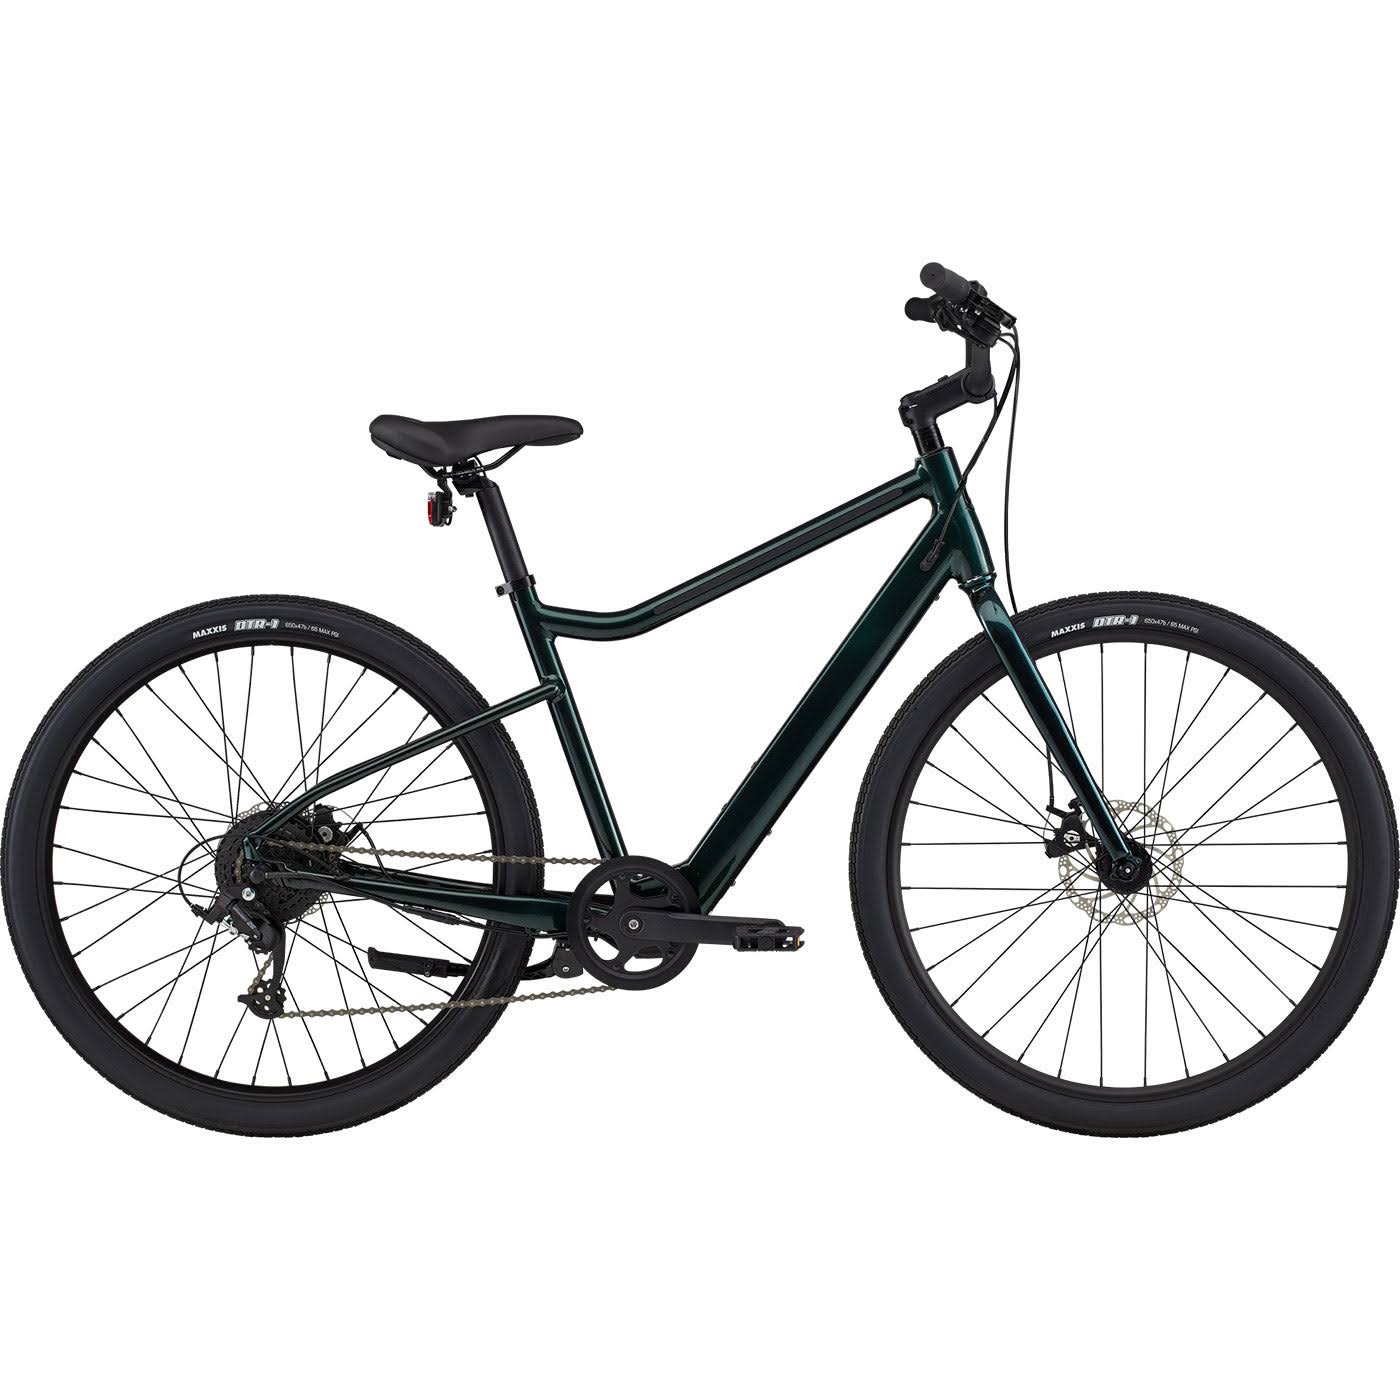 Treadwell Neo 2 2022 | E-Bike By Cannondale